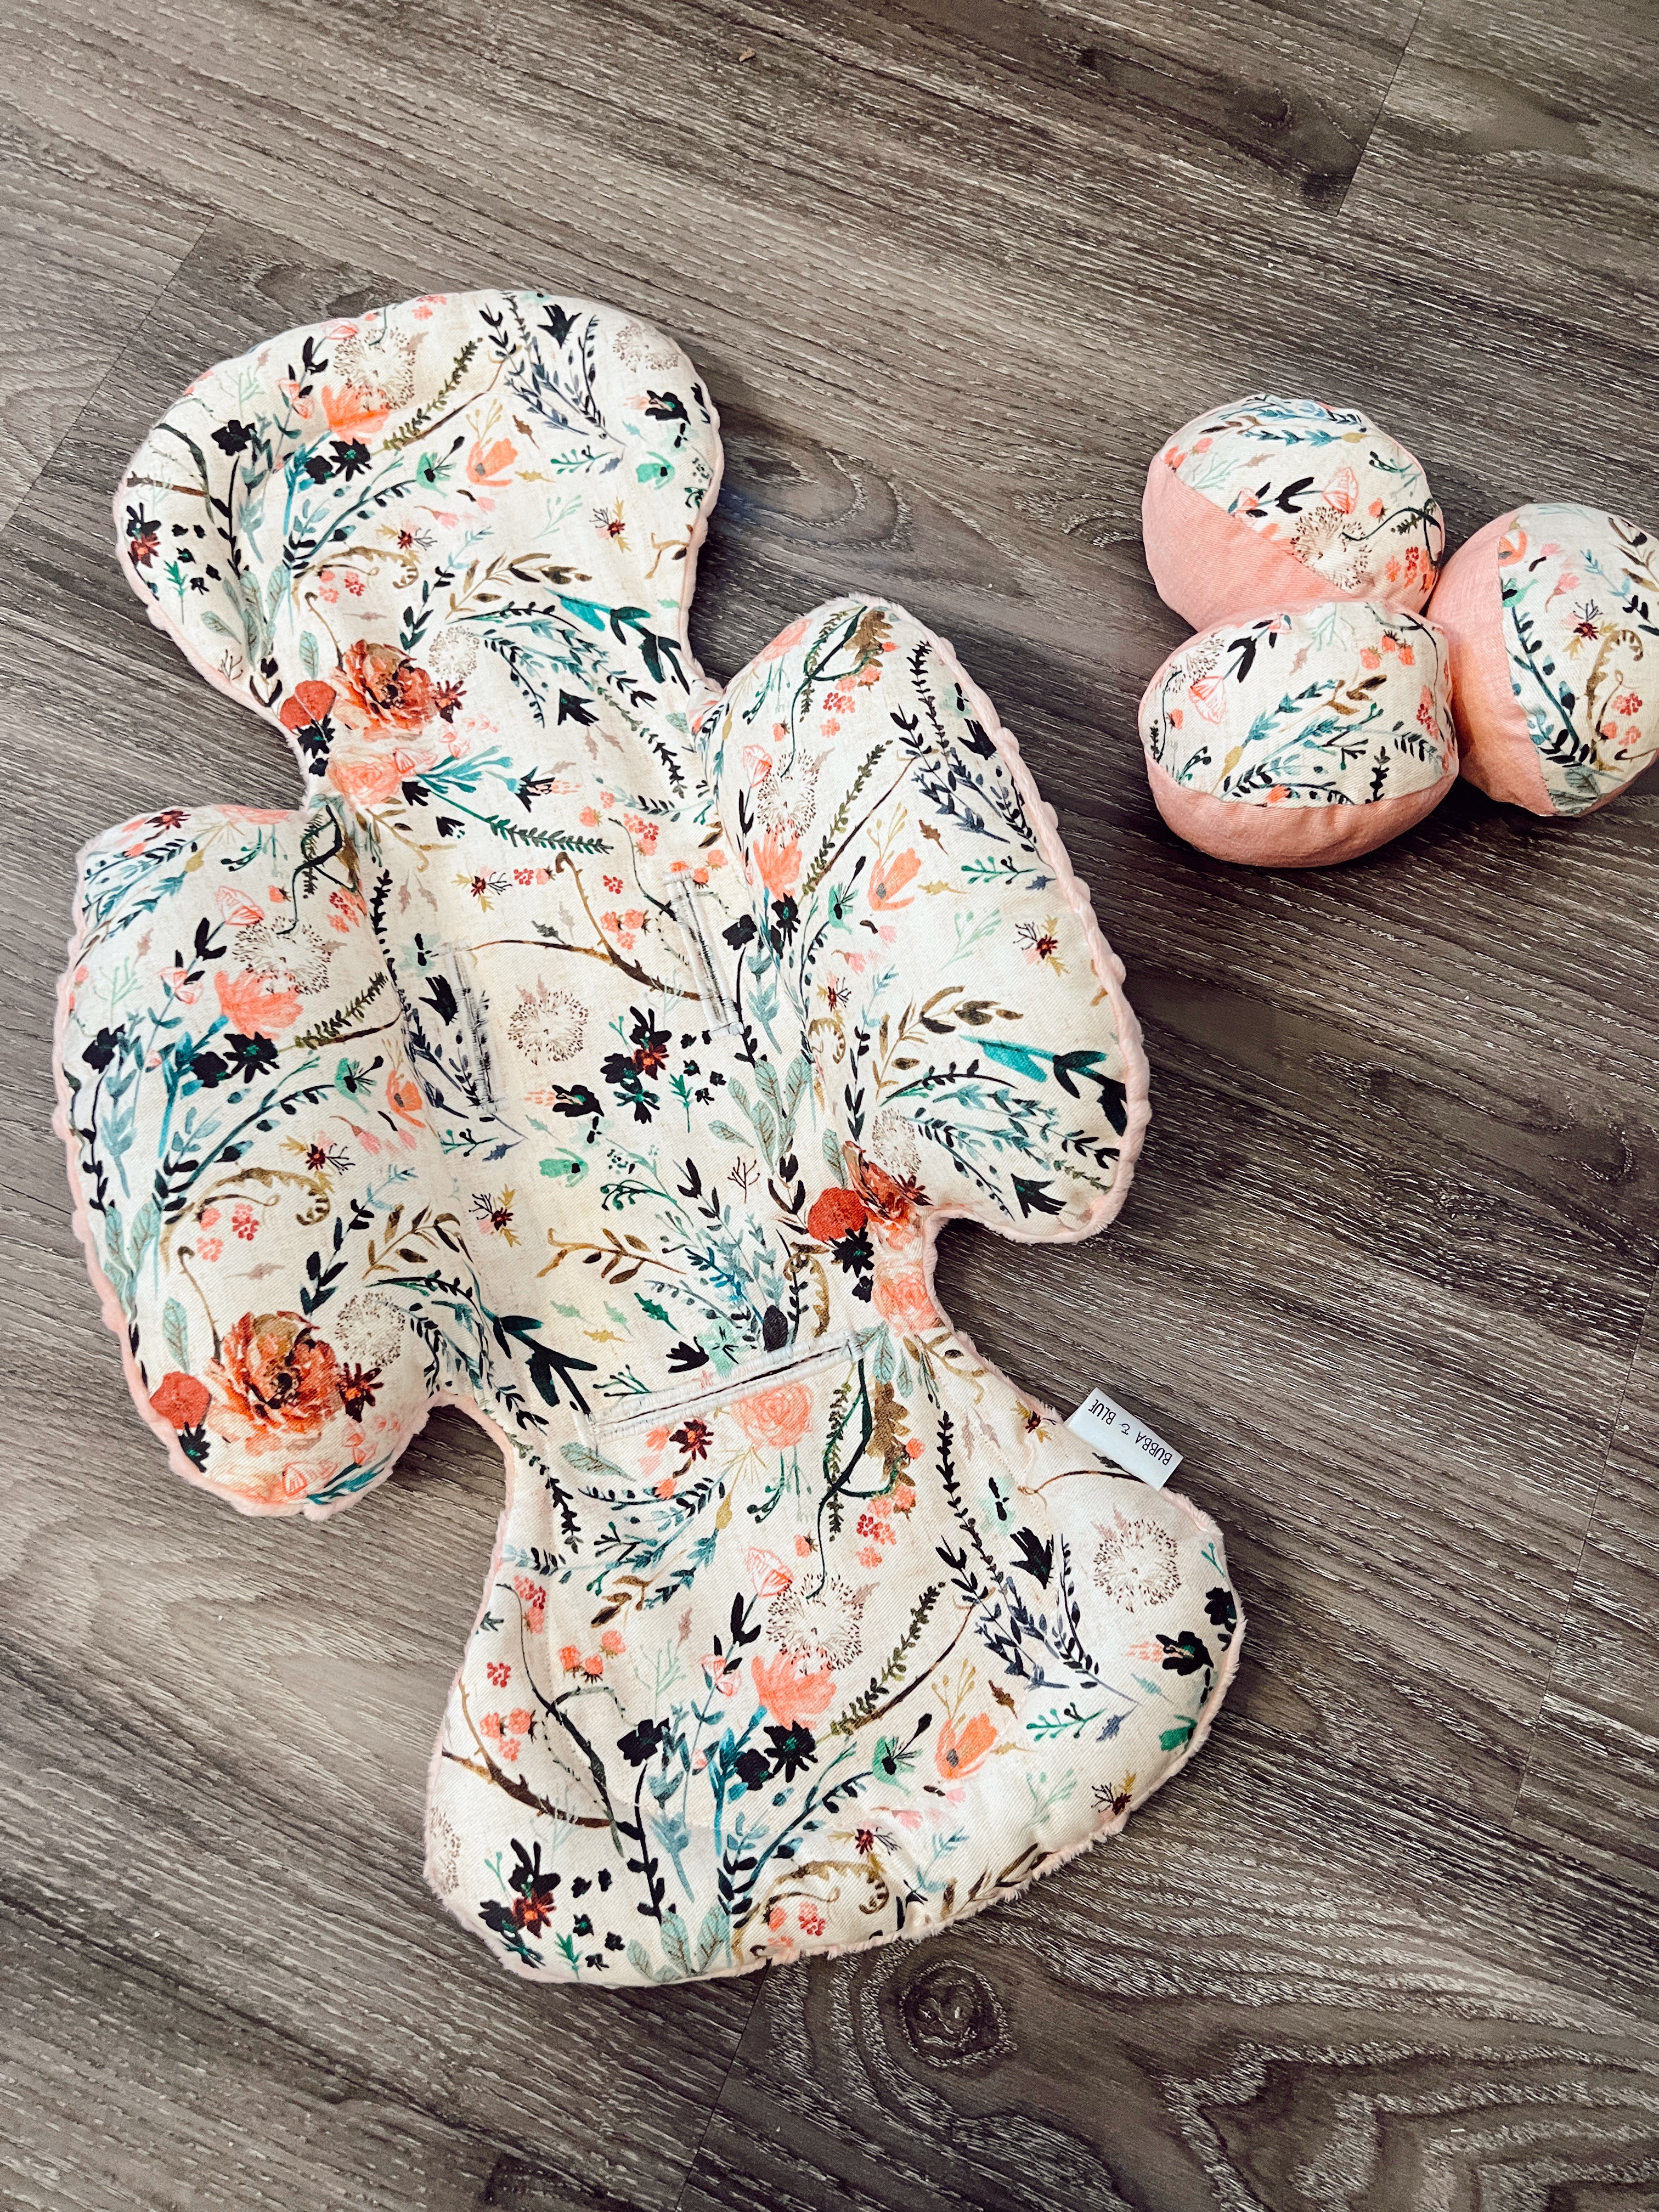 Mamaroo seat cover and newborn insert in light fable floral